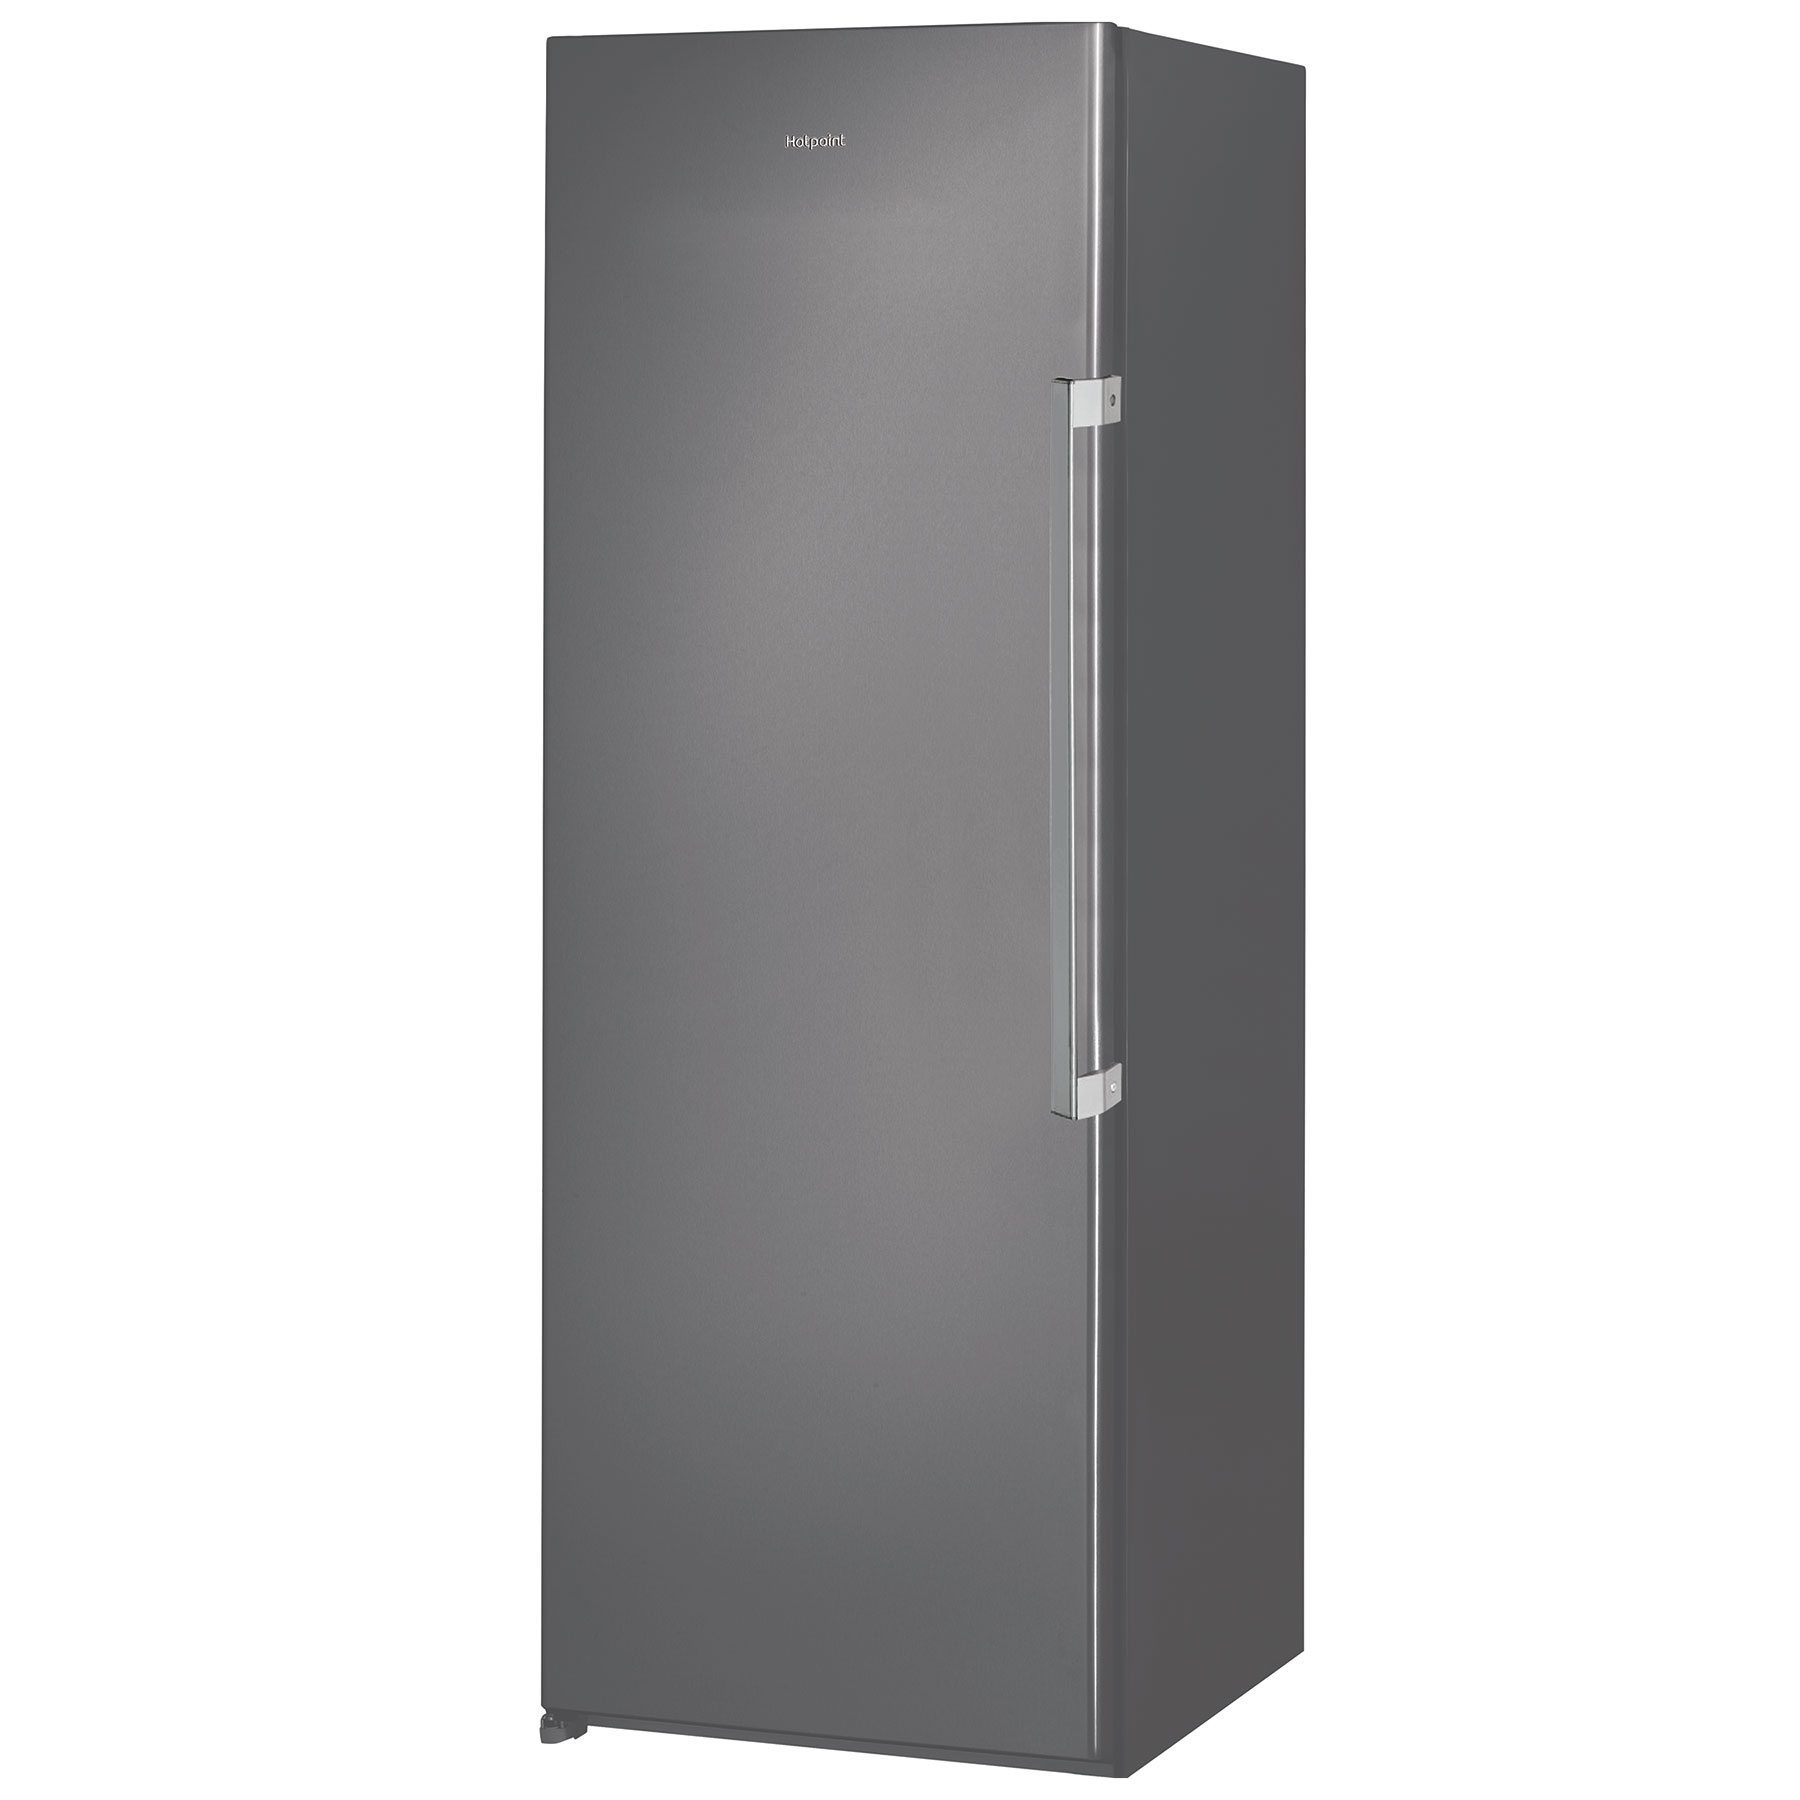 Image of Hotpoint UH6F2CG 60cm Tall Frost Free Freezer in Graphite 1 67m E Rate